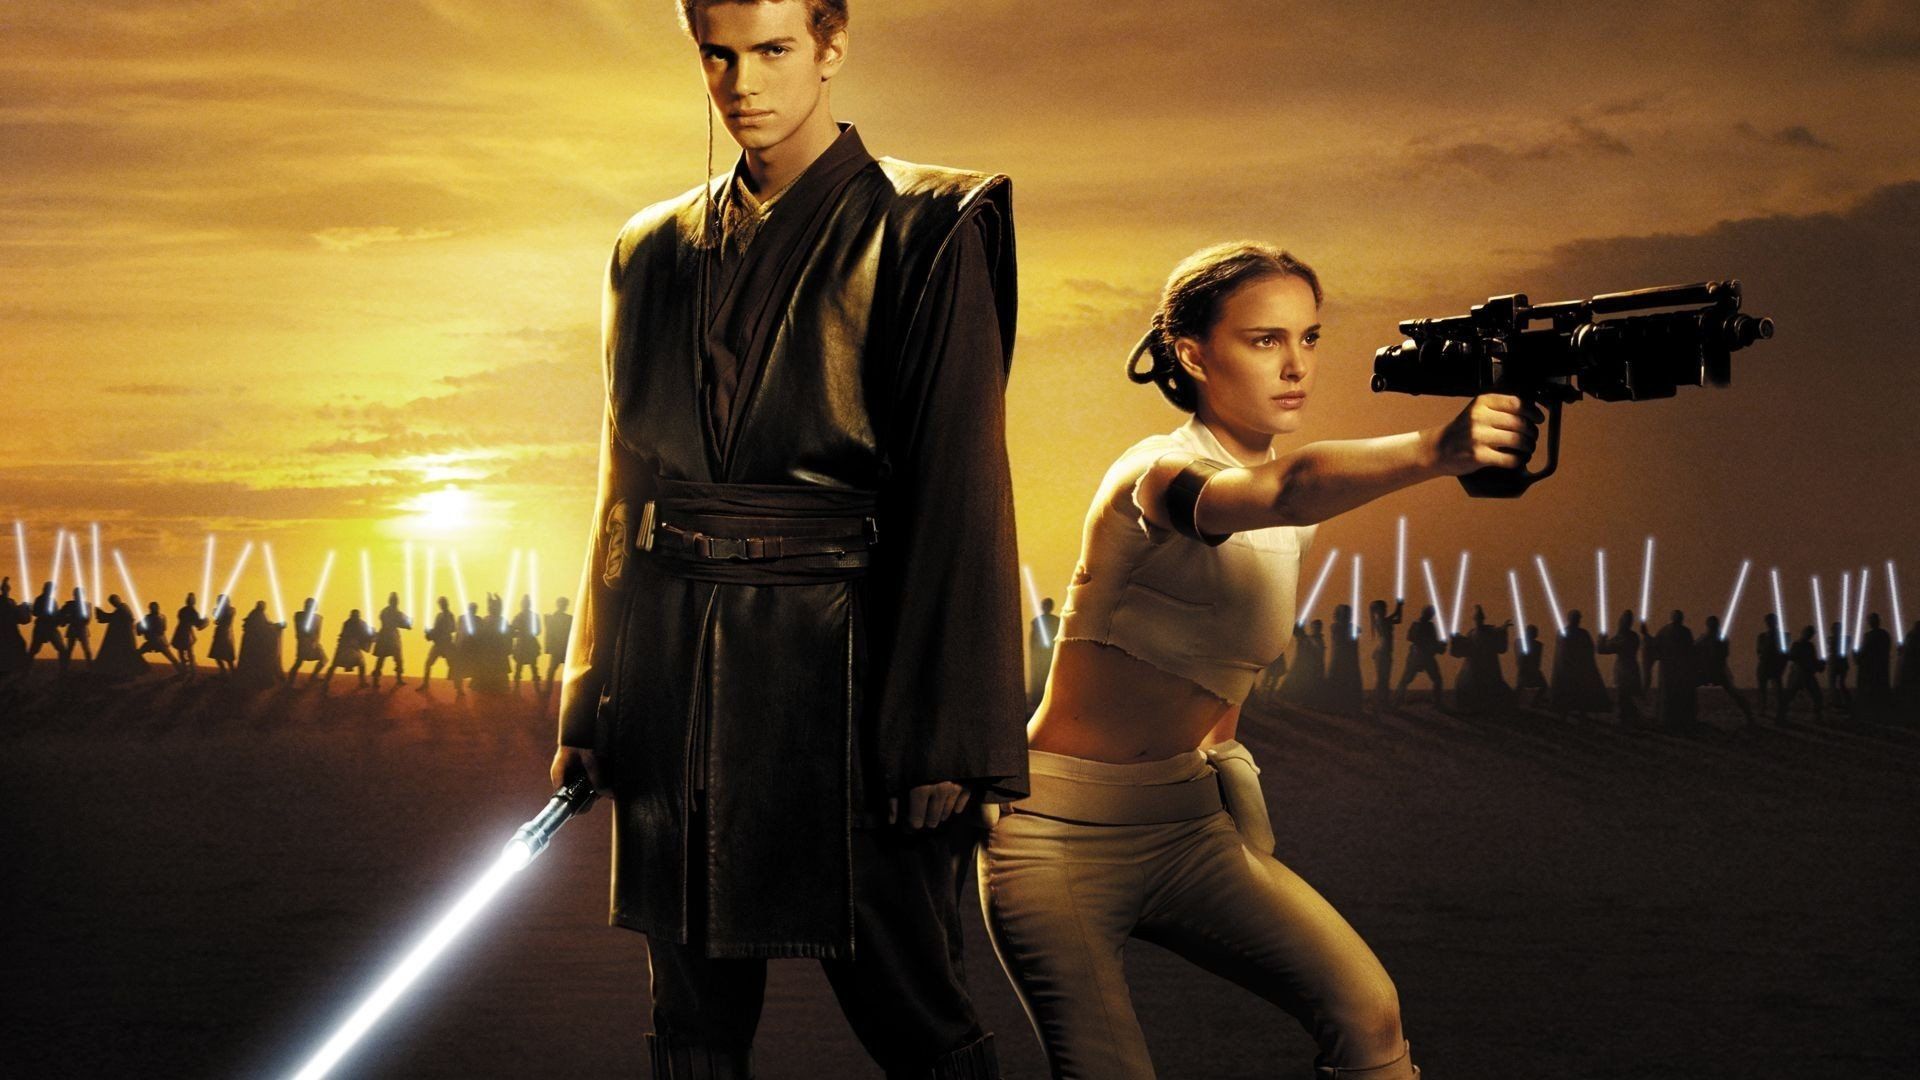 Star Wars Episode II: Attack Of The Clones HD Wallpaper and Background Image